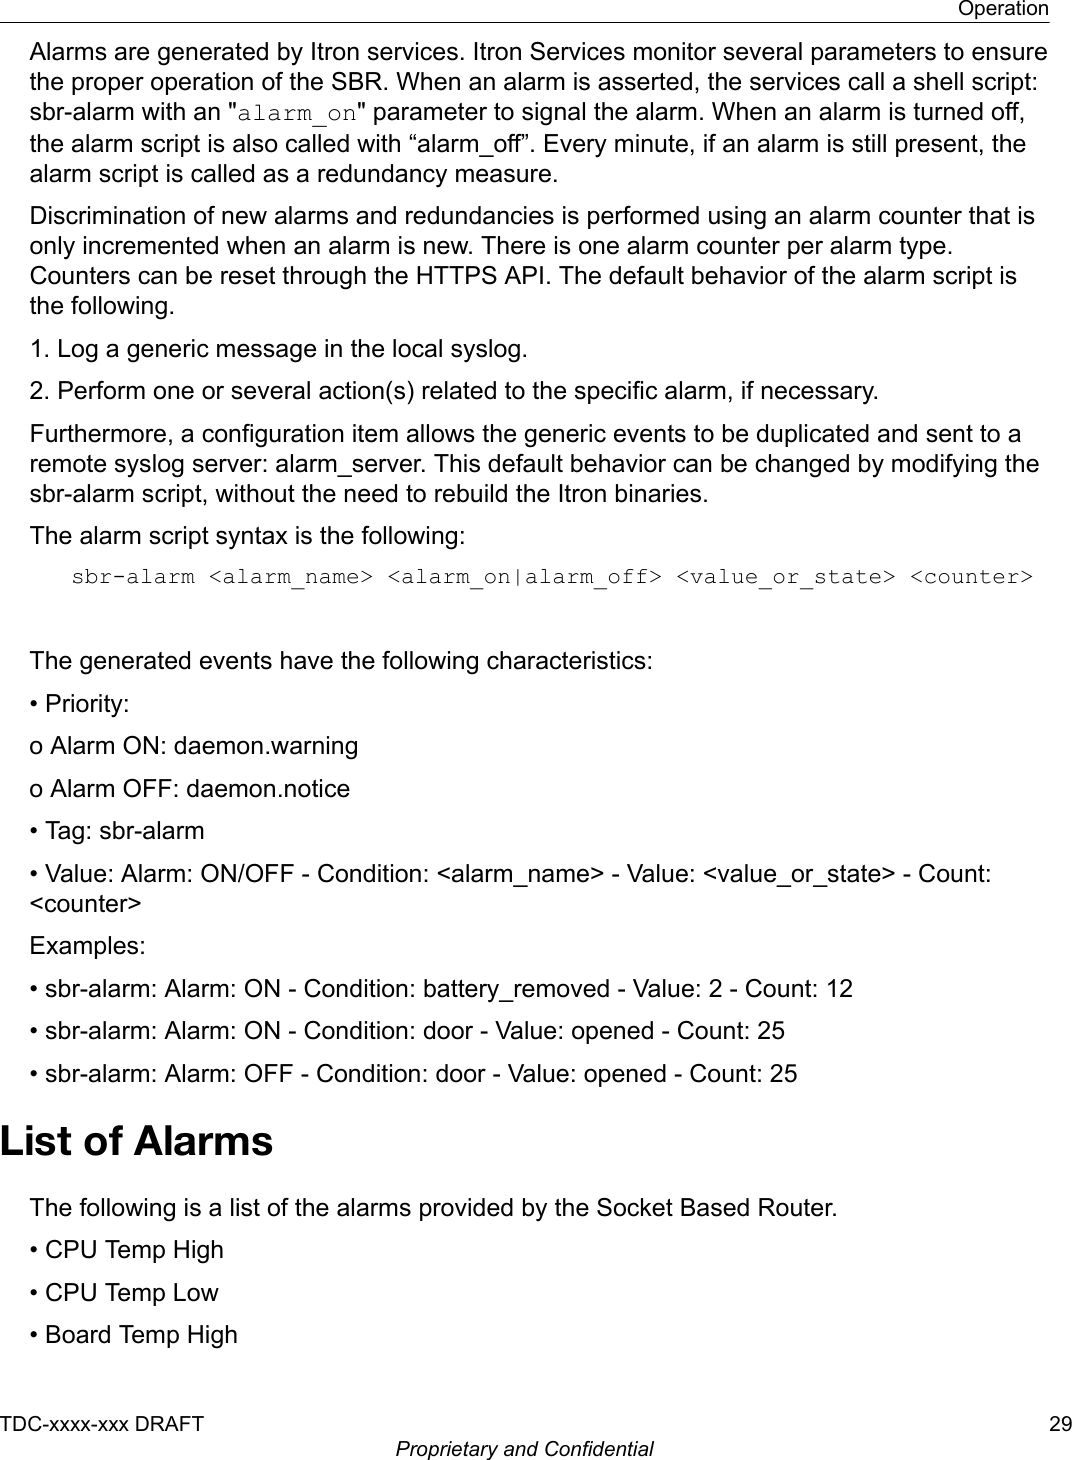 Alarms are generated by Itron services. Itron Services monitor several parameters to ensurethe proper operation of the SBR. When an alarm is asserted, the services call a shell script:sbr-alarm with an &quot;alarm_on&quot; parameter to signal the alarm. When an alarm is turned off,the alarm script is also called with “alarm_off”. Every minute, if an alarm is still present, thealarm script is called as a redundancy measure.Discrimination of new alarms and redundancies is performed using an alarm counter that isonly incremented when an alarm is new. There is one alarm counter per alarm type.Counters can be reset through the HTTPS API. The default behavior of the alarm script isthe following.1. Log a generic message in the local syslog.2. Perform one or several action(s) related to the specific alarm, if necessary.Furthermore, a configuration item allows the generic events to be duplicated and sent to aremote syslog server: alarm_server. This default behavior can be changed by modifying thesbr-alarm script, without the need to rebuild the Itron binaries.The alarm script syntax is the following:sbr-alarm &lt;alarm_name&gt; &lt;alarm_on|alarm_off&gt; &lt;value_or_state&gt; &lt;counter&gt; The generated events have the following characteristics:• Priority:o Alarm ON: daemon.warningo Alarm OFF: daemon.notice• Tag: sbr-alarm• Value: Alarm: ON/OFF - Condition: &lt;alarm_name&gt; - Value: &lt;value_or_state&gt; - Count:&lt;counter&gt;Examples:• sbr-alarm: Alarm: ON - Condition: battery_removed - Value: 2 - Count: 12• sbr-alarm: Alarm: ON - Condition: door - Value: opened - Count: 25• sbr-alarm: Alarm: OFF - Condition: door - Value: opened - Count: 25List of AlarmsThe following is a list of the alarms provided by the Socket Based Router.• CPU Temp High• CPU Temp Low• Board Temp HighOperationTDC-xxxx-xxx DRAFT 29Proprietary and Confidential